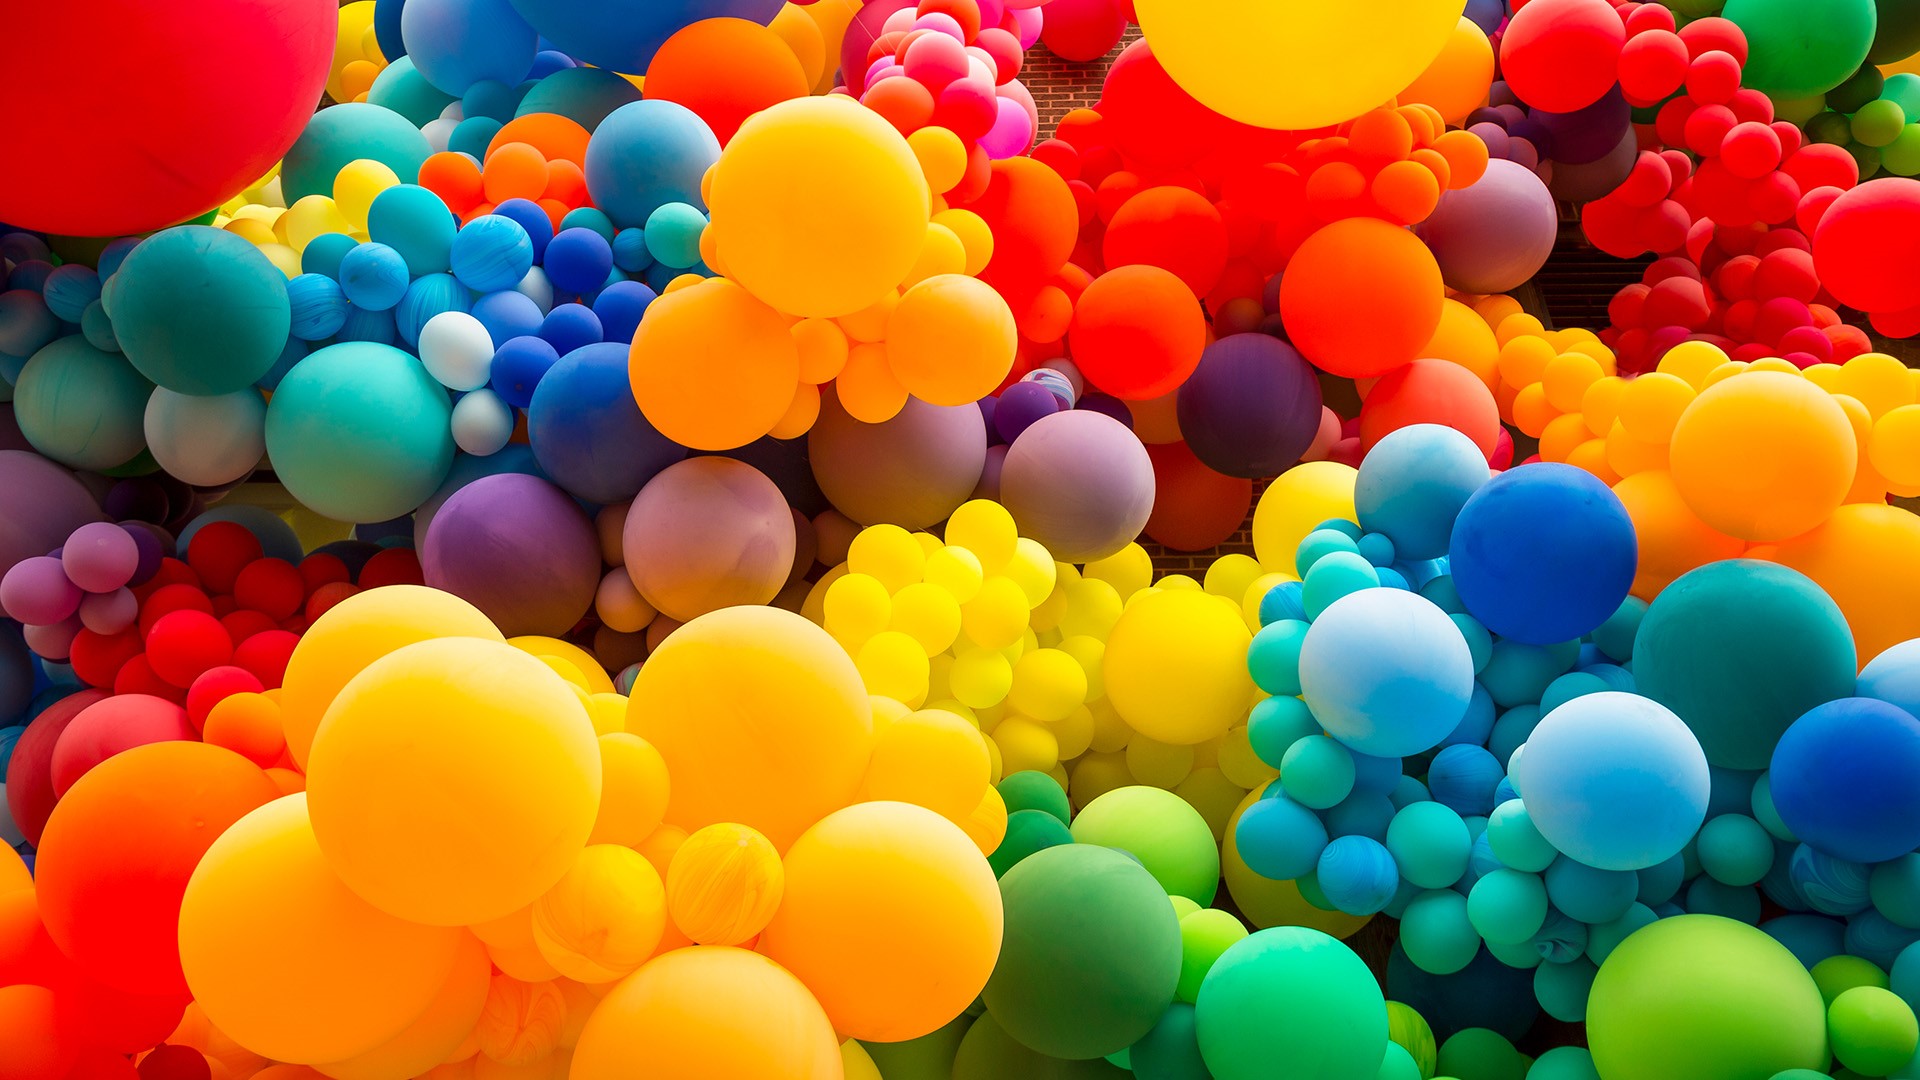 Bright abstract background of jumble of rainbow colored balloons | Windows  Spotlight Images